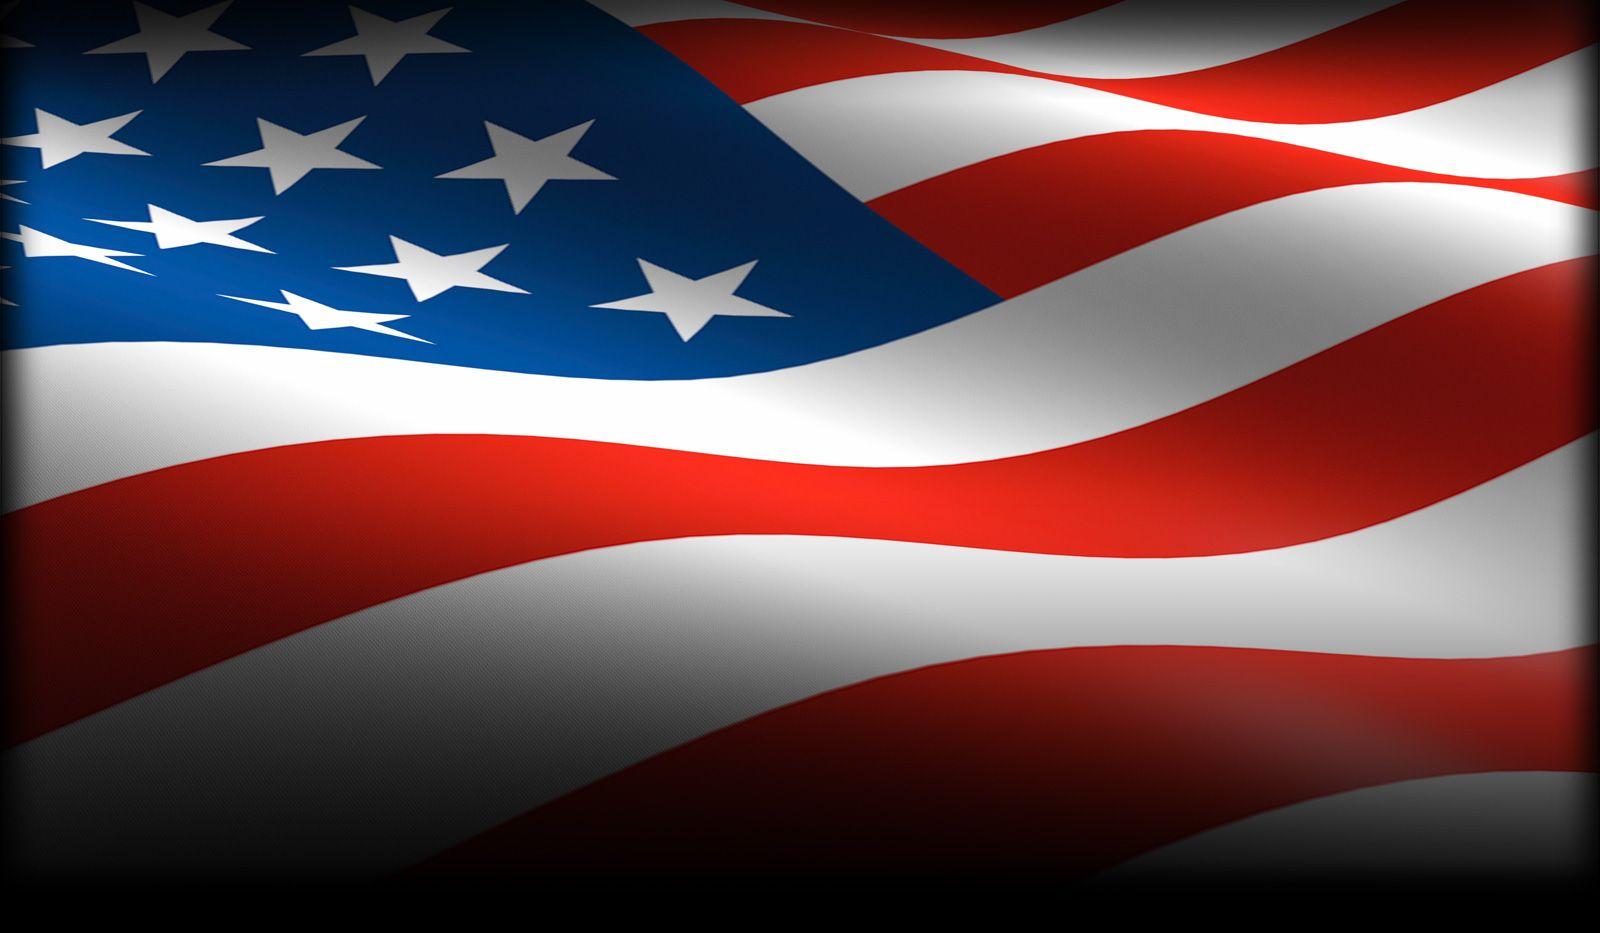 patriotic military background 14. Background Check All